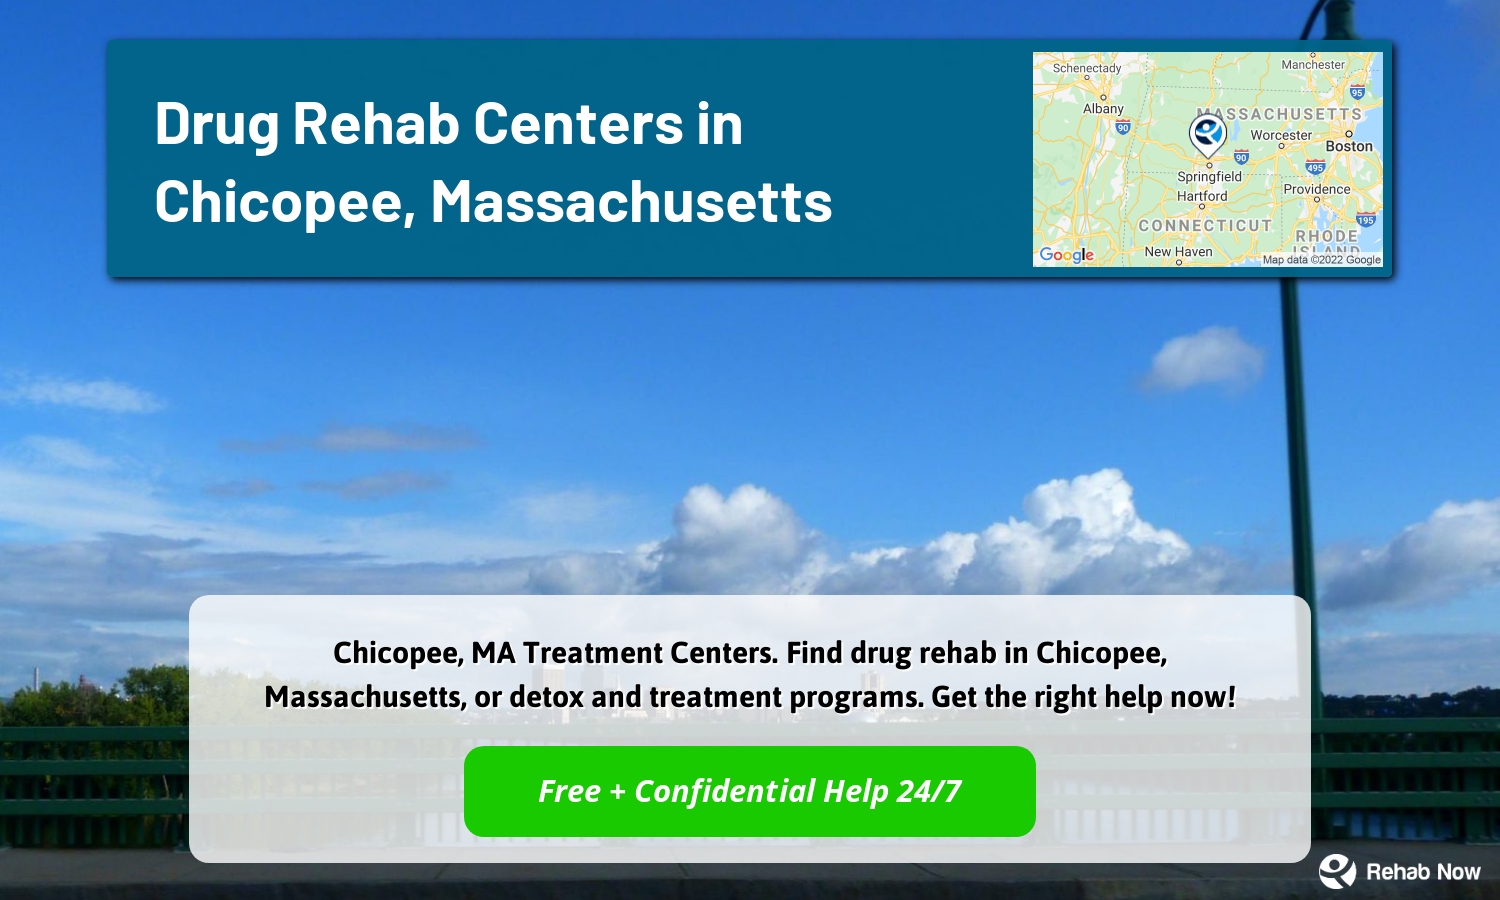 Chicopee, MA Treatment Centers. Find drug rehab in Chicopee, Massachusetts, or detox and treatment programs. Get the right help now!